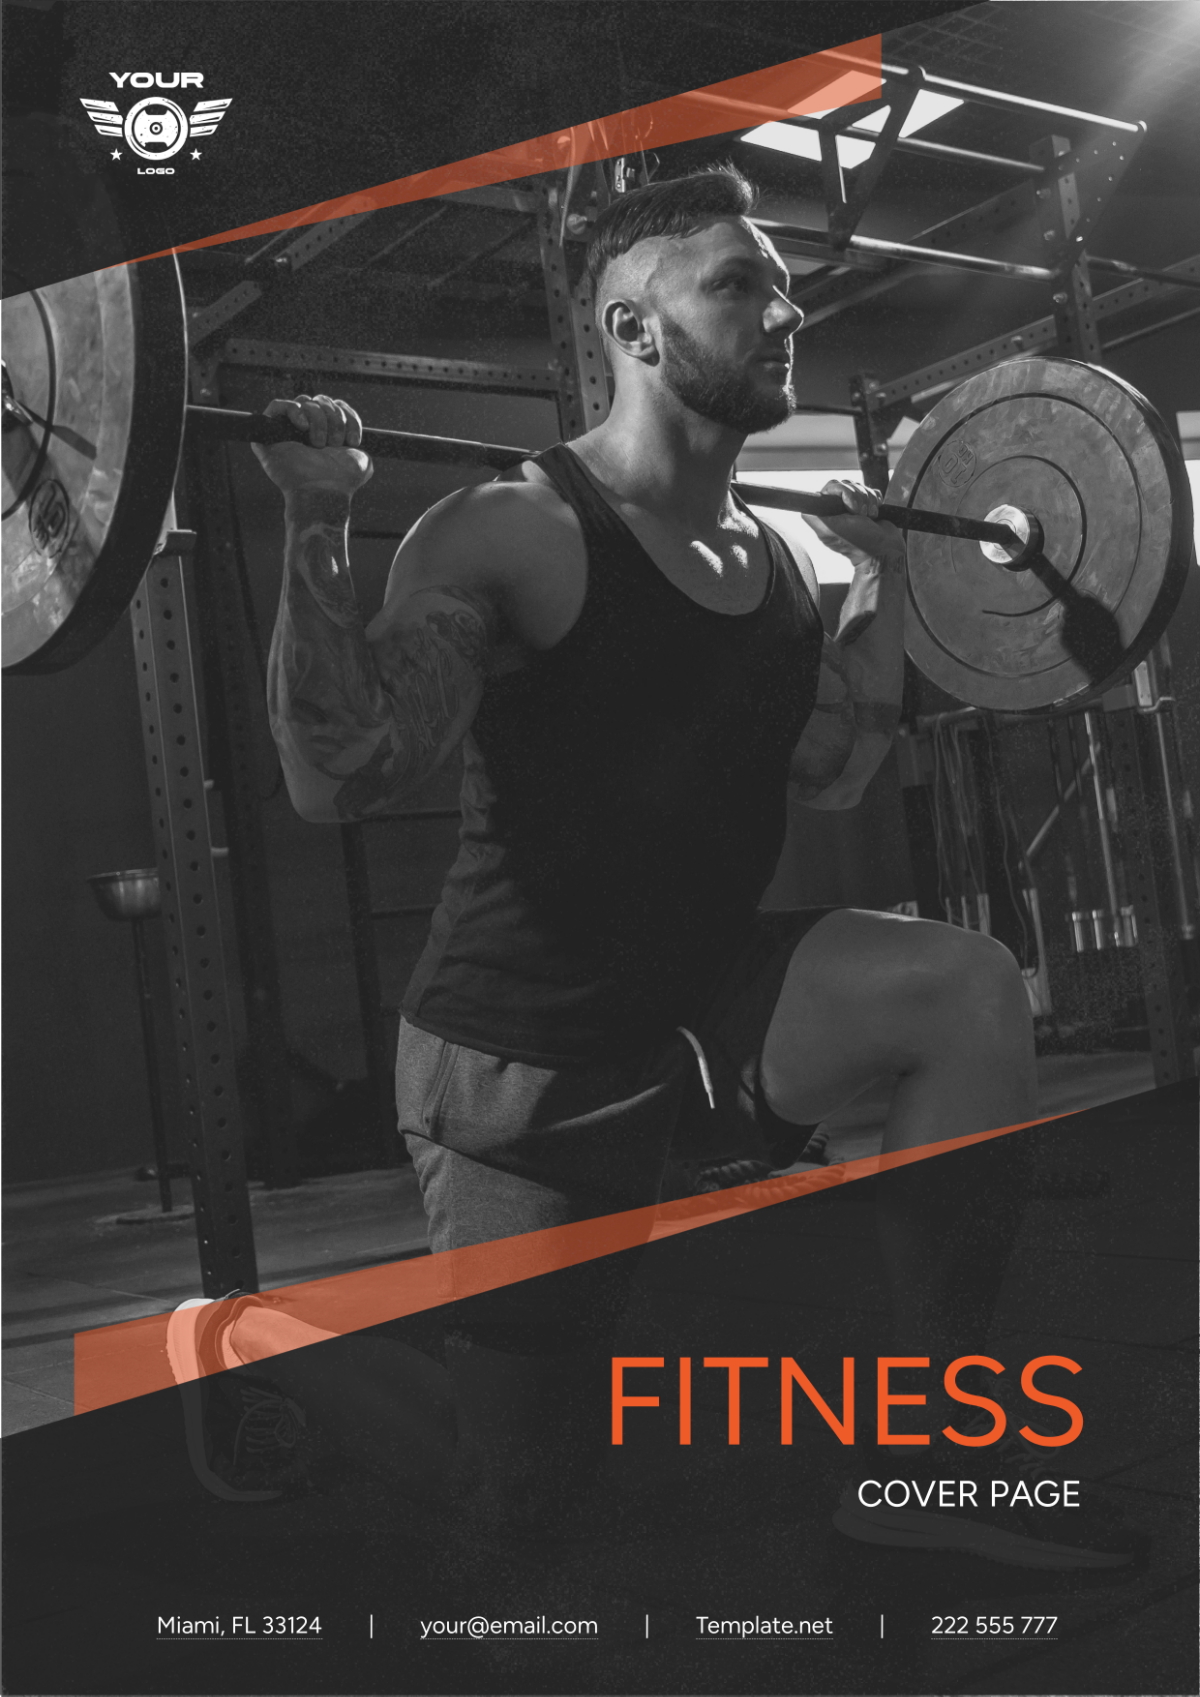 Fitness Center Business Cover Page